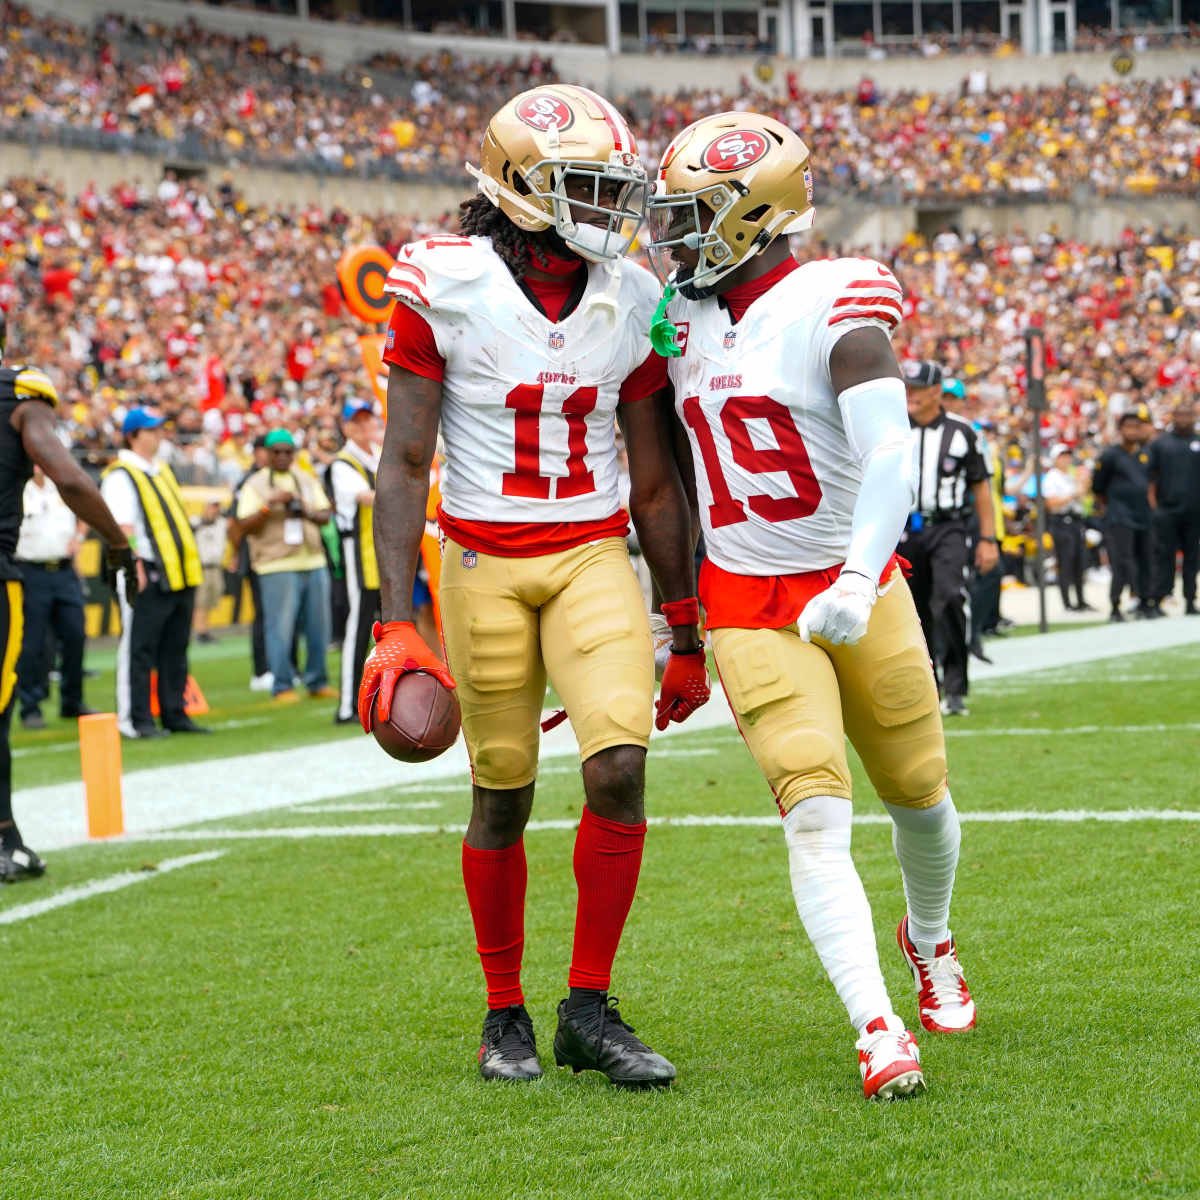 “There’s nothing going on right now… nothing to report” - #Steelers GM Omar Khan Practically stomping on the rumors that they’re trying to trade for #49ers WR Deebo Samuel or Brandon Aiyuk. Can we close this and move on now plz!